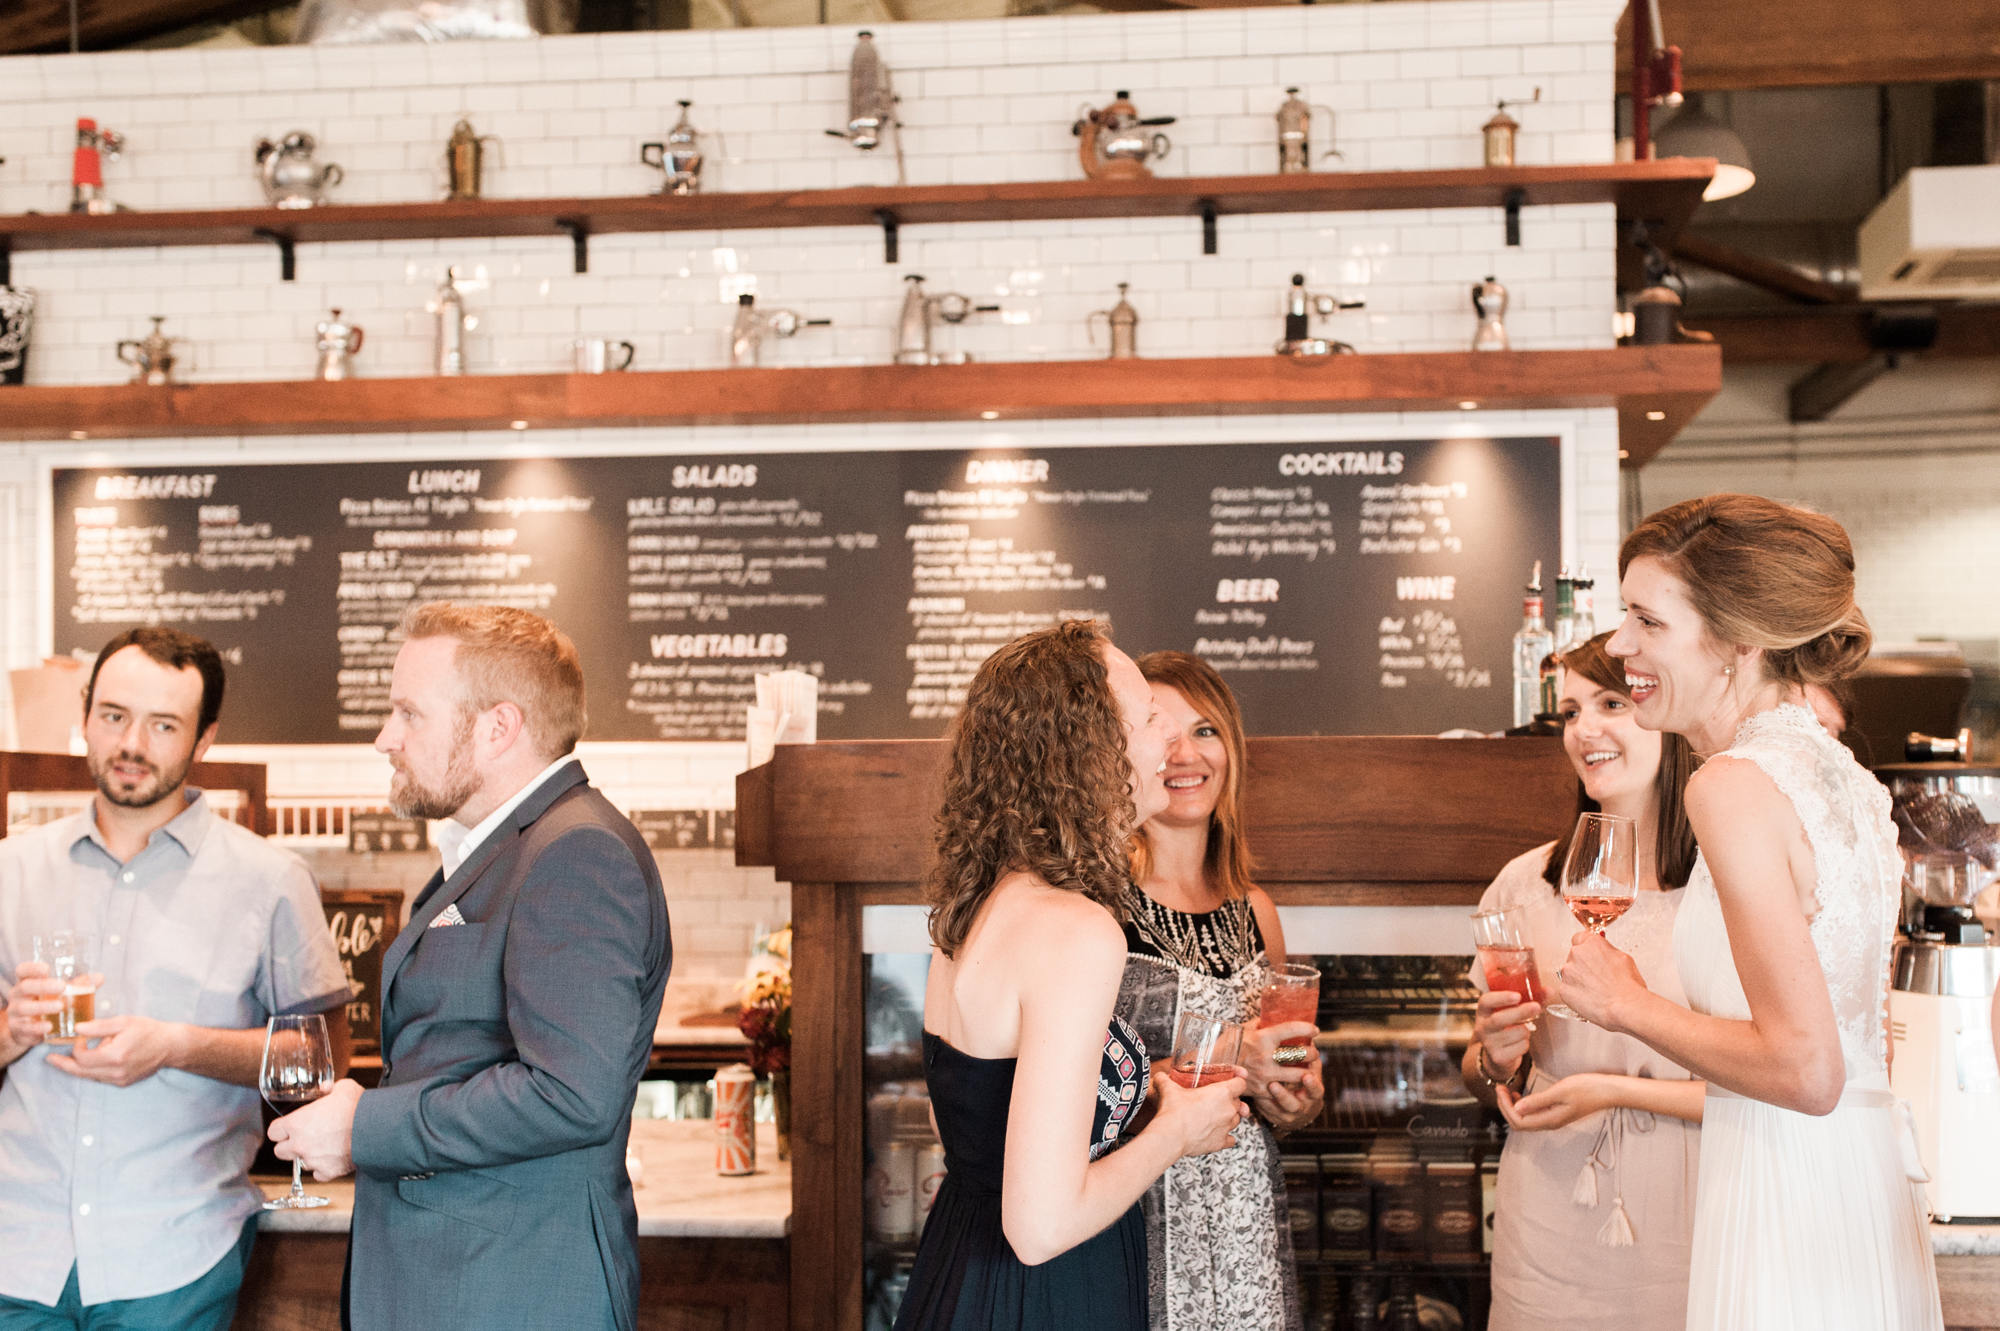 Wedding guests chat before dinner at Roman Candle Baking Co in Portland, Oregon. By wedding photographer Briana Morrison